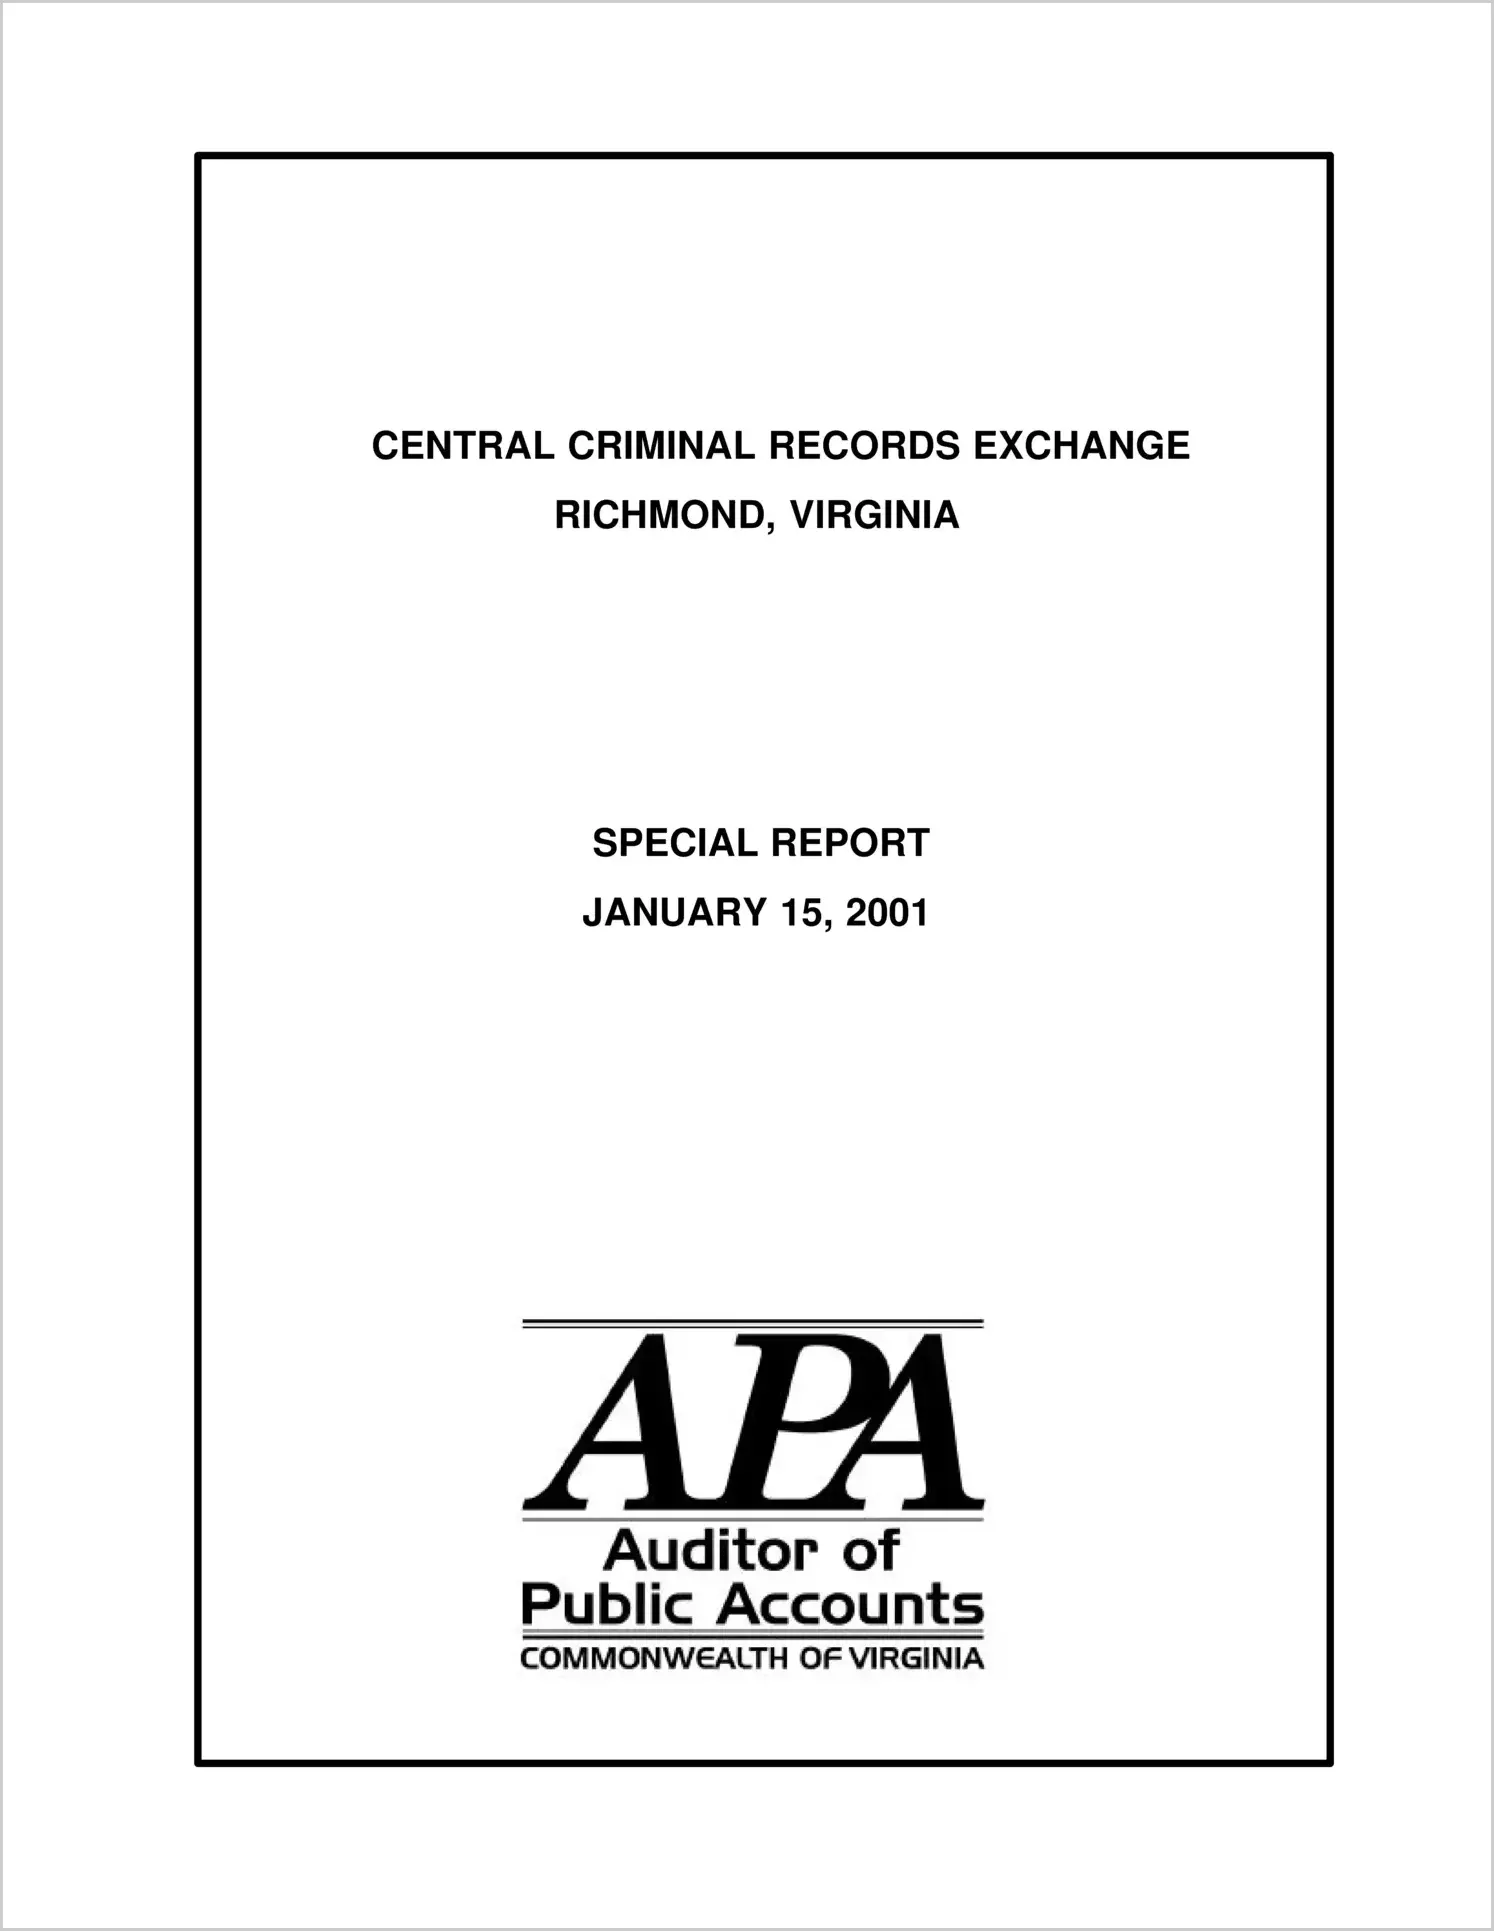 Special ReportCentral Criminal Records Exchange(Report Date: 01/15/2001)